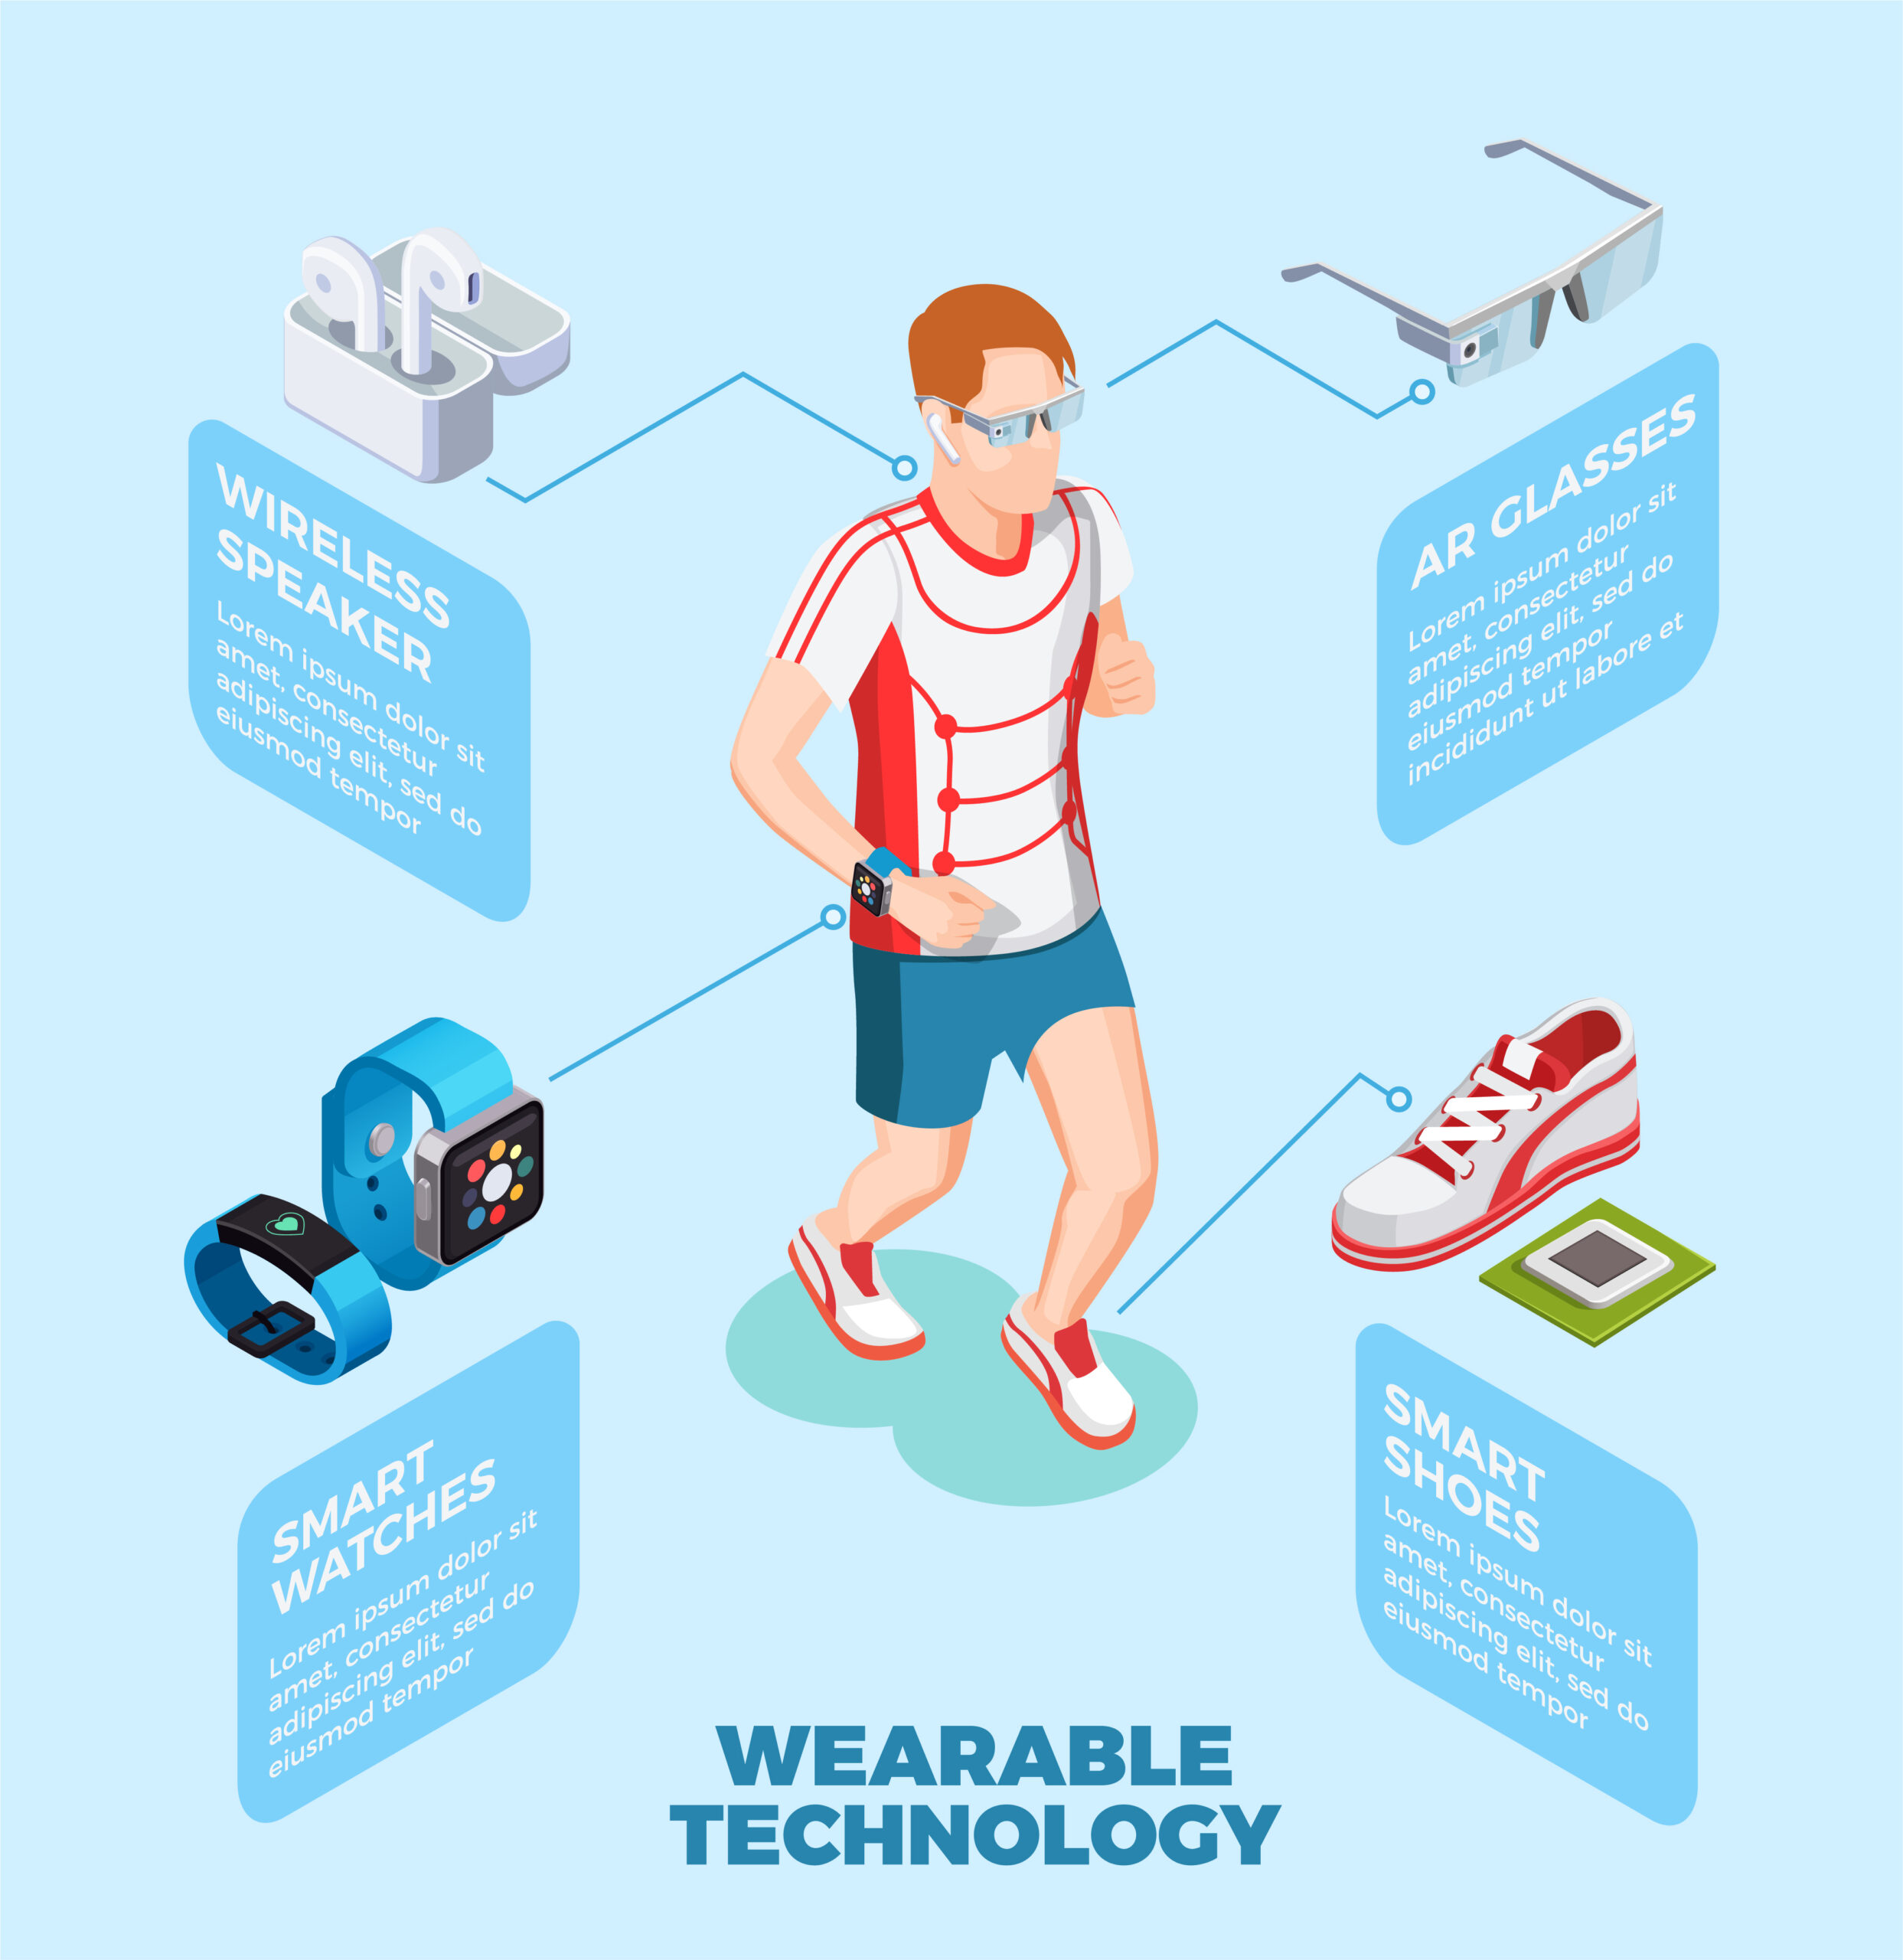 1. Wearable Technology 2. Integrating Tech 3. Daily Life 4. Apple 5. Samsung 6. Boat 7. AI Integration 8. Health and Fitness 9. Sustainability 10. Future Innovations